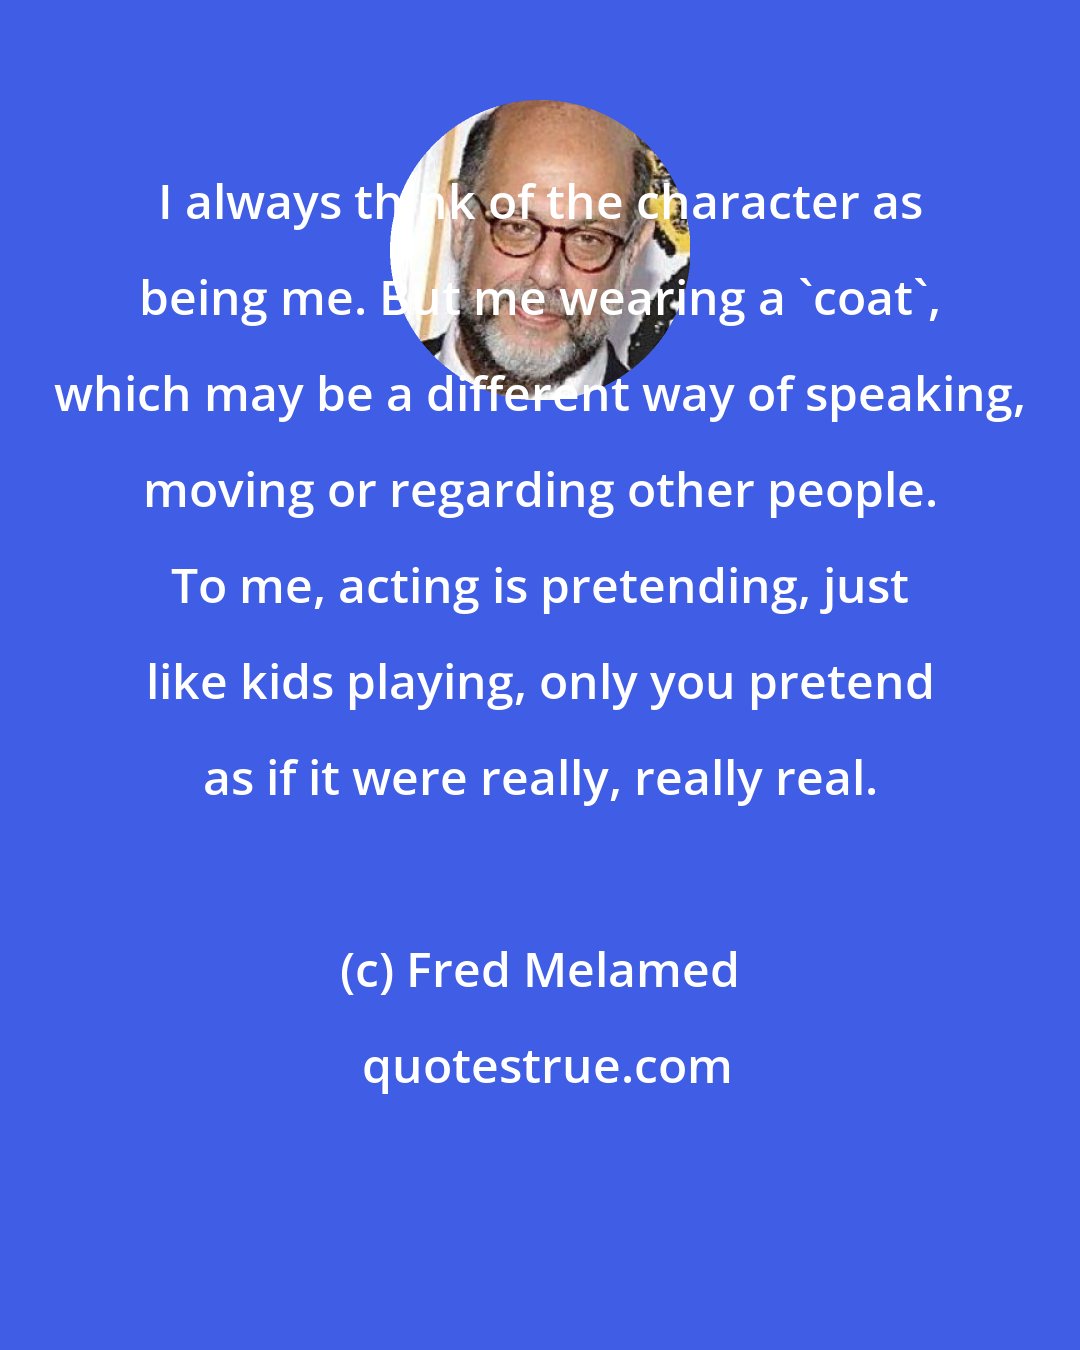 Fred Melamed: I always think of the character as being me. But me wearing a 'coat', which may be a different way of speaking, moving or regarding other people. To me, acting is pretending, just like kids playing, only you pretend as if it were really, really real.